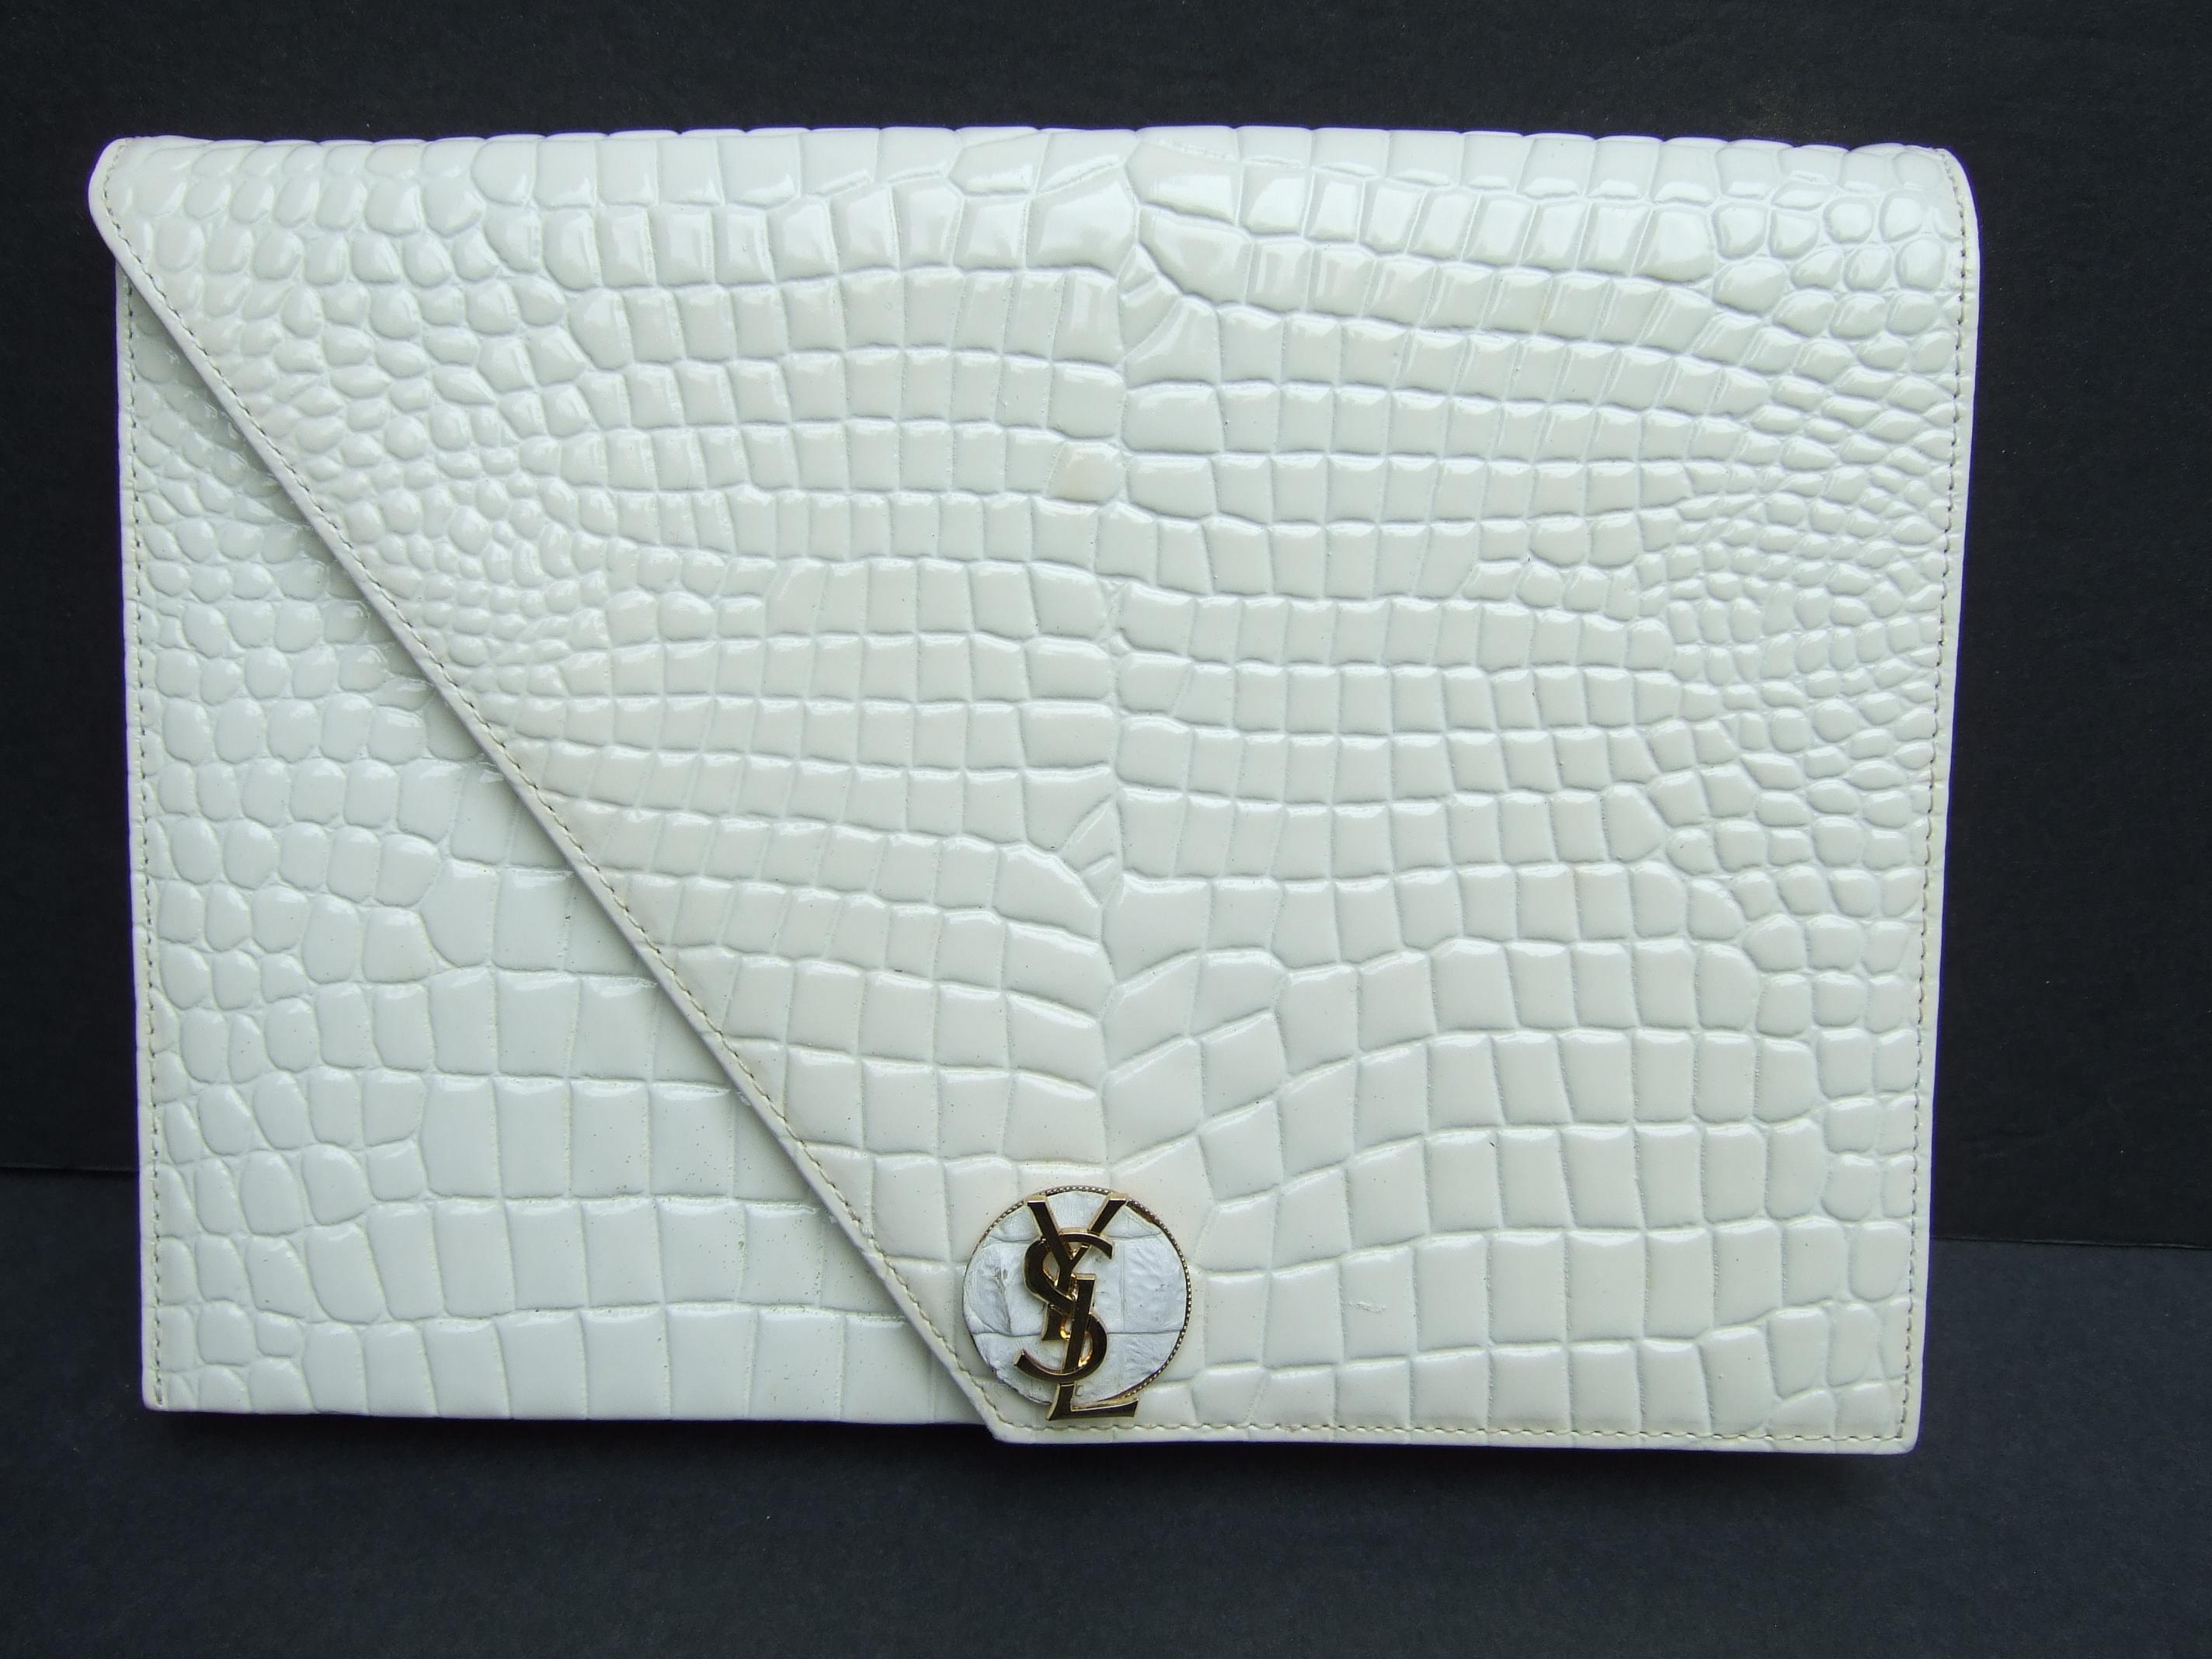 Yves Saint Laurent Chic embossed cream leather clutch c 1980s
The stylish embossed leather clutch is adorned with Saint Laurent's 
iconic gilt metal Y.S.L. initials 

The exterior leather covering has an embossed scale design in a cream color
shade